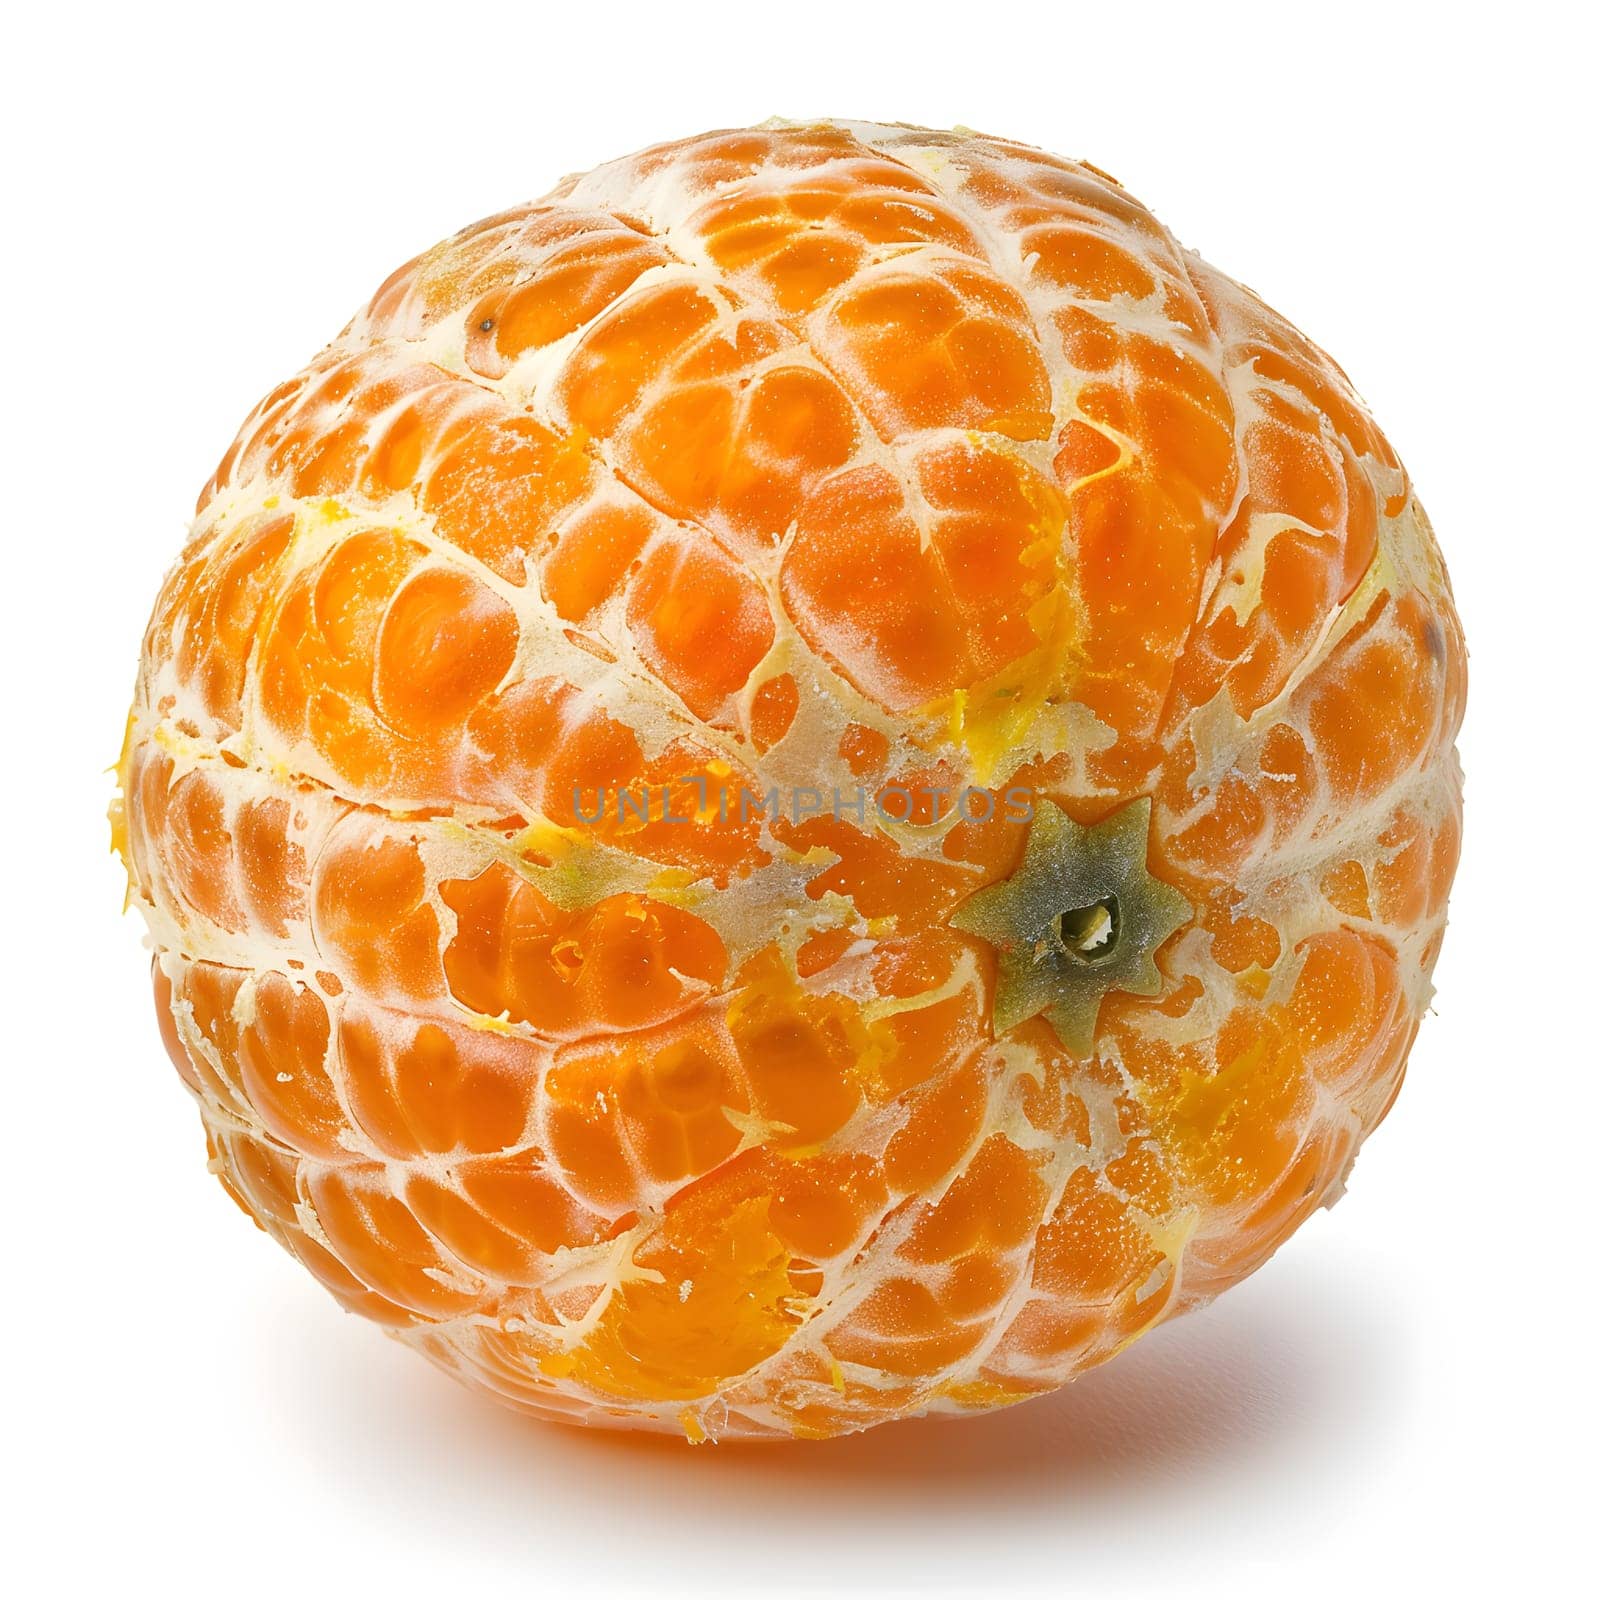 A closeup of a peeled clementine orange, a seedless citrus fruit, on a white background. This natural superfood is packed with vitamins and nutrients